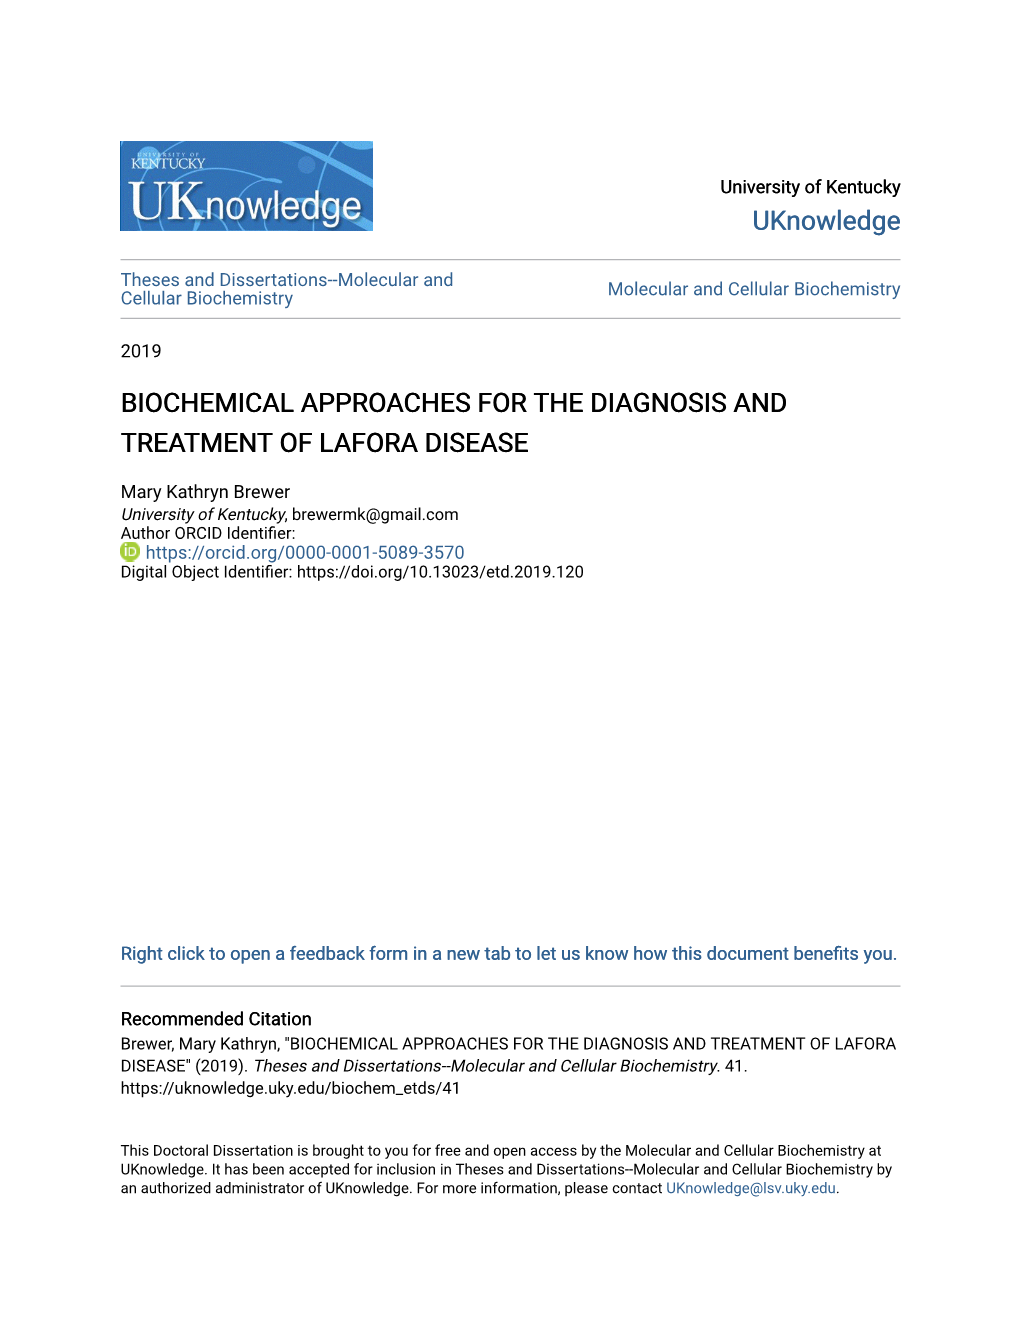 Biochemical Approaches for the Diagnosis and Treatment of Lafora Disease